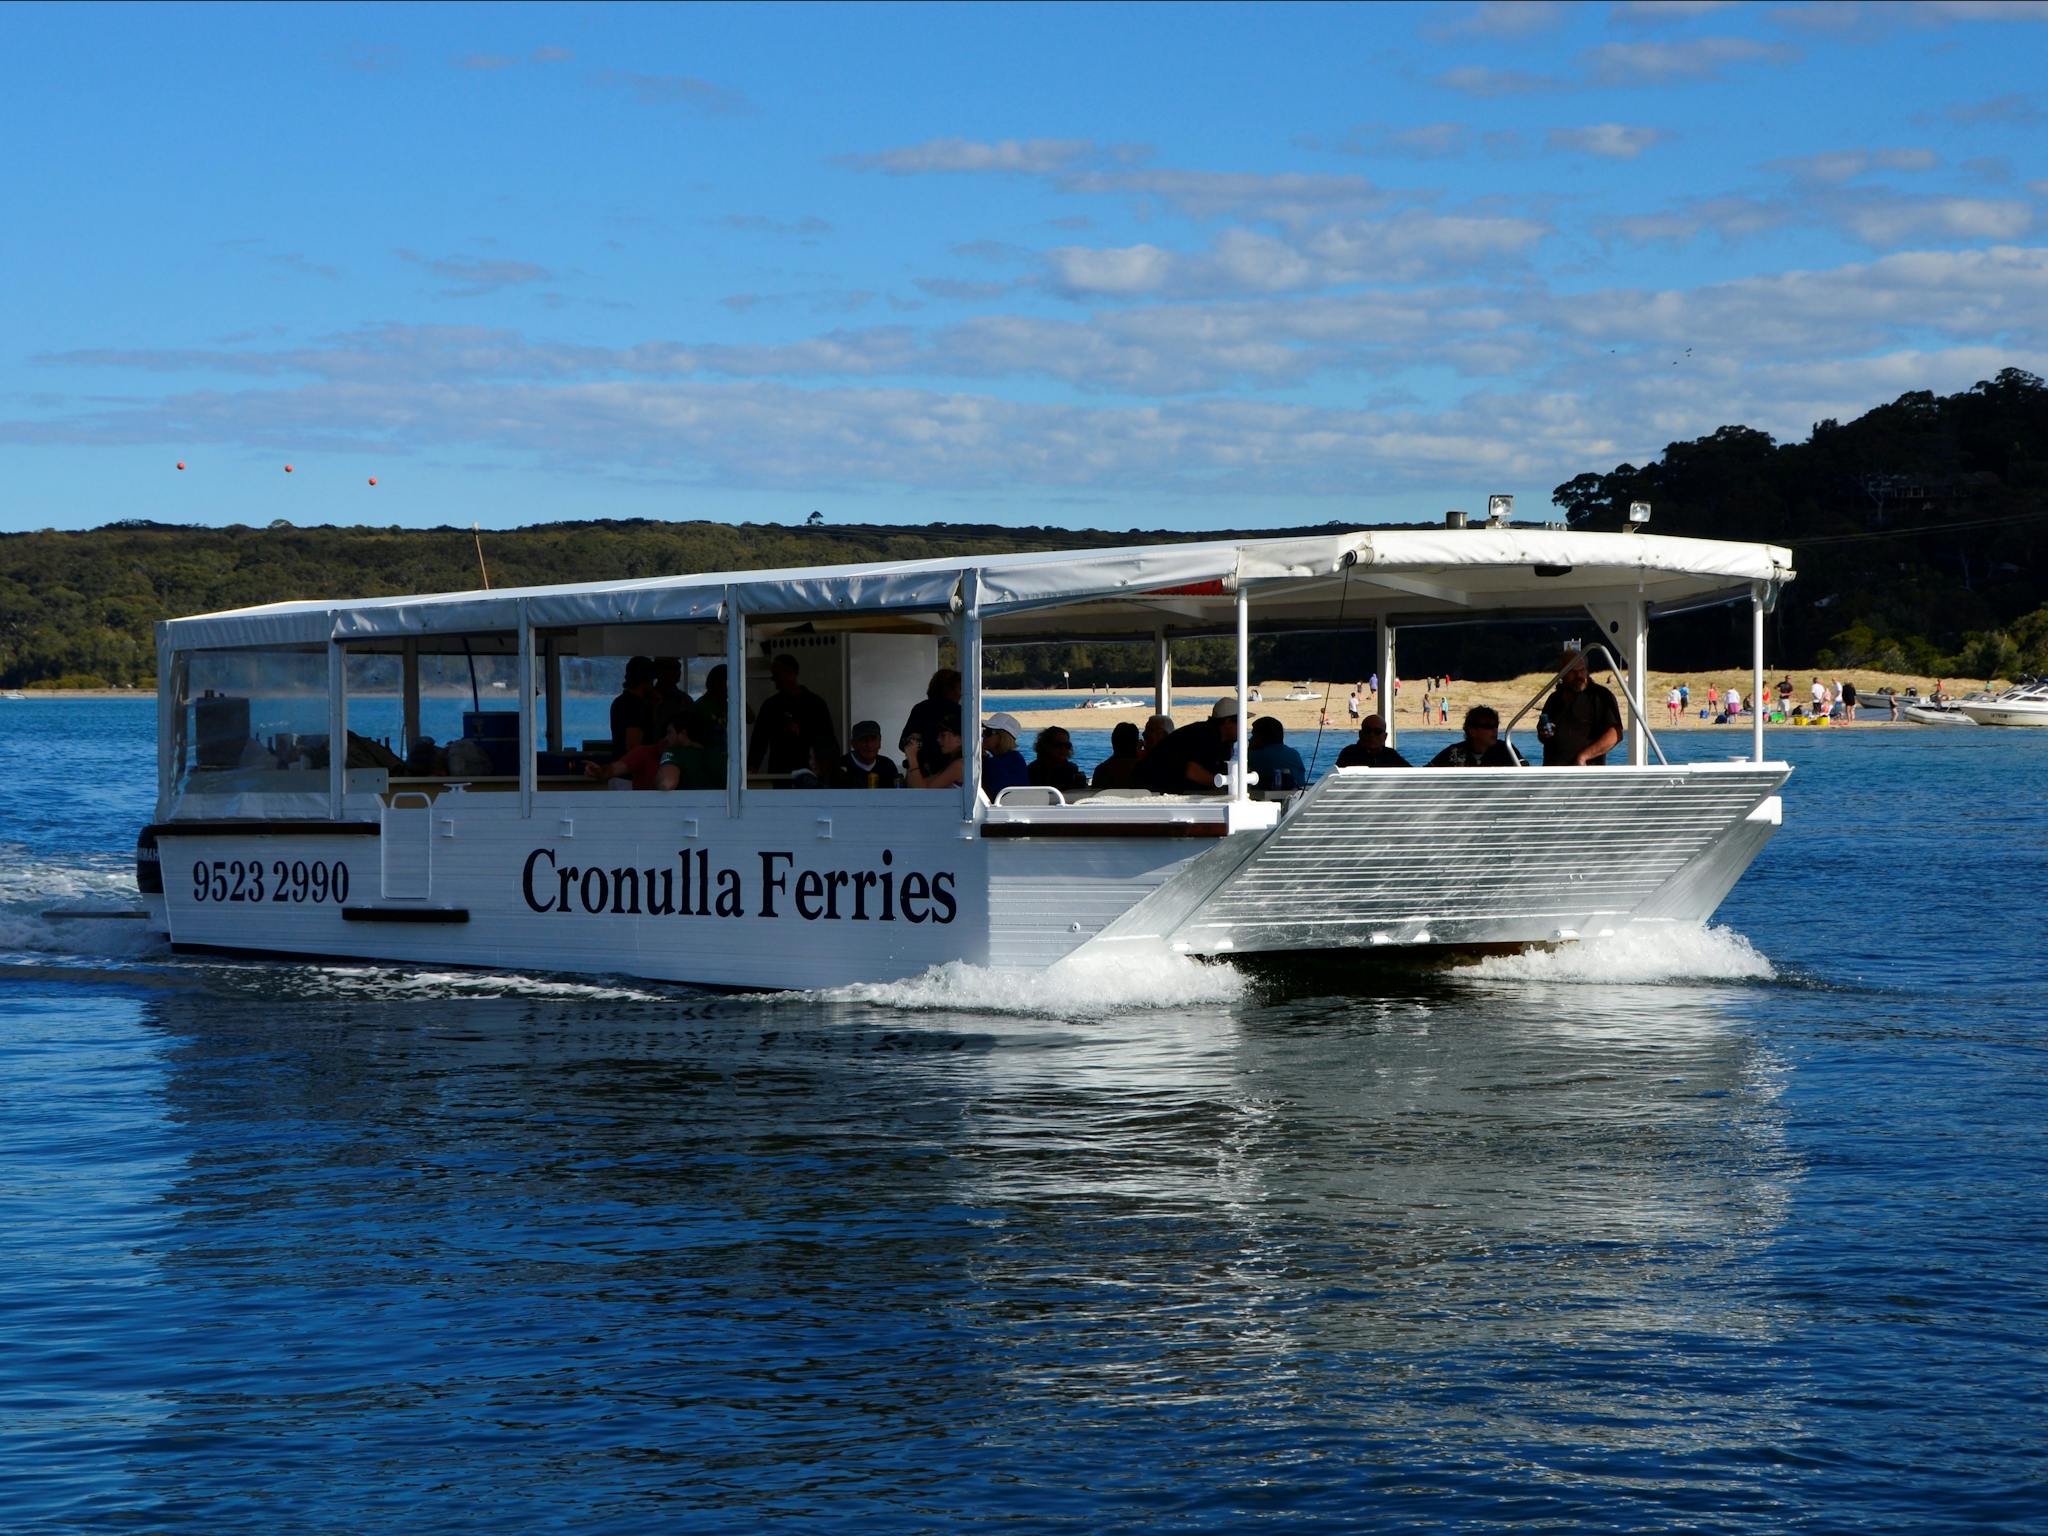 port hacking river lunch cruise